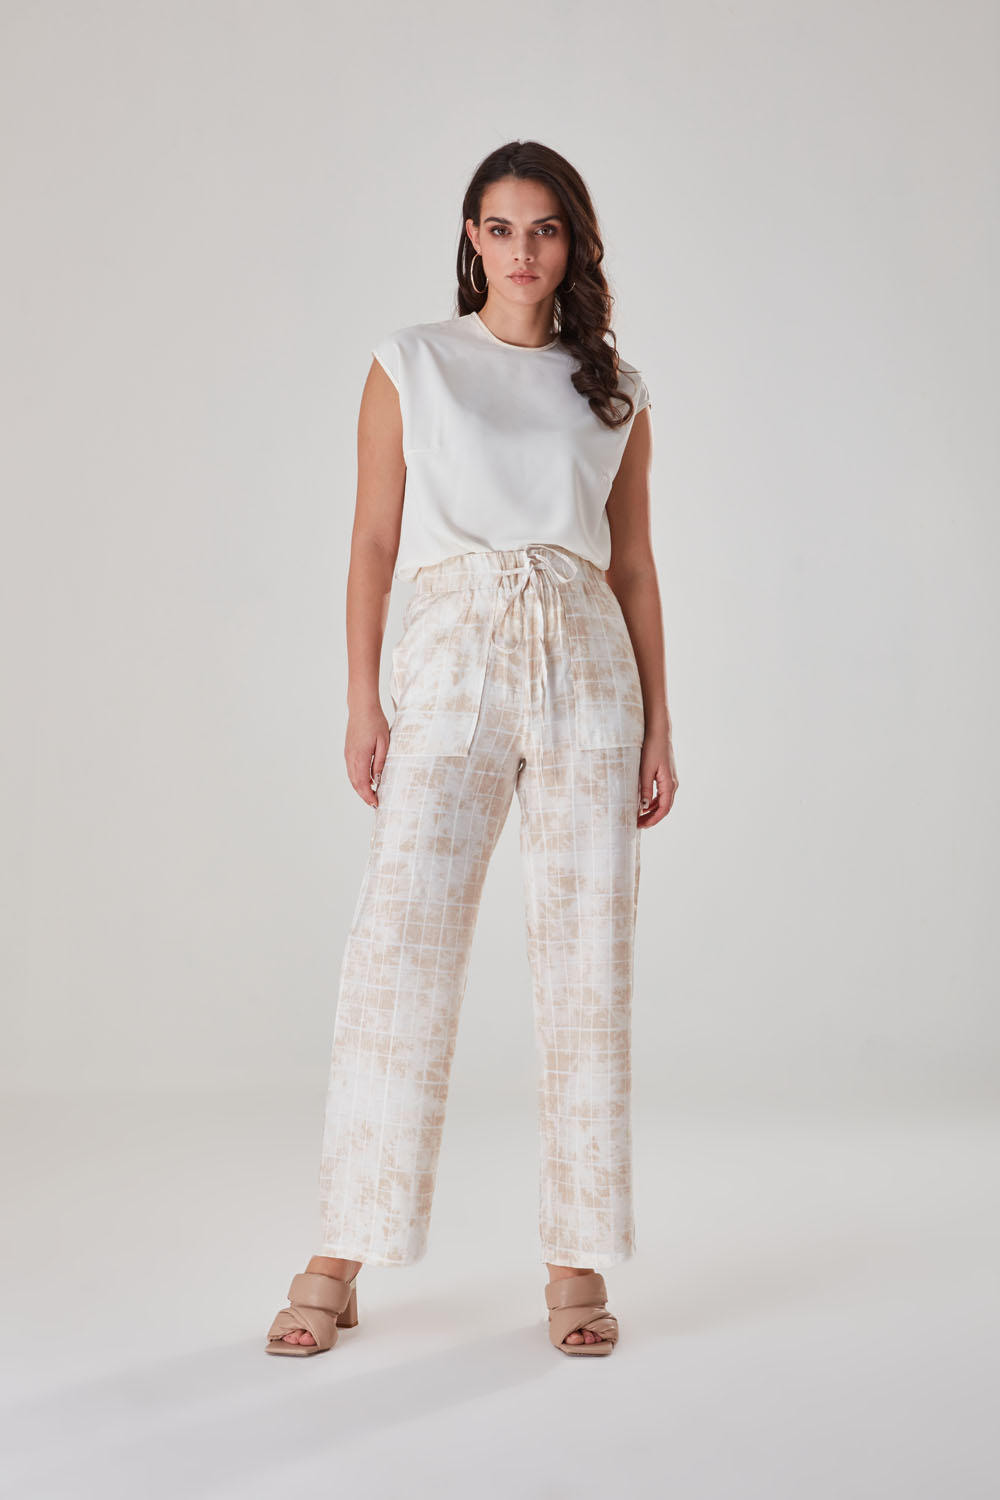 Beige Batik Patterned Checkered Trousers